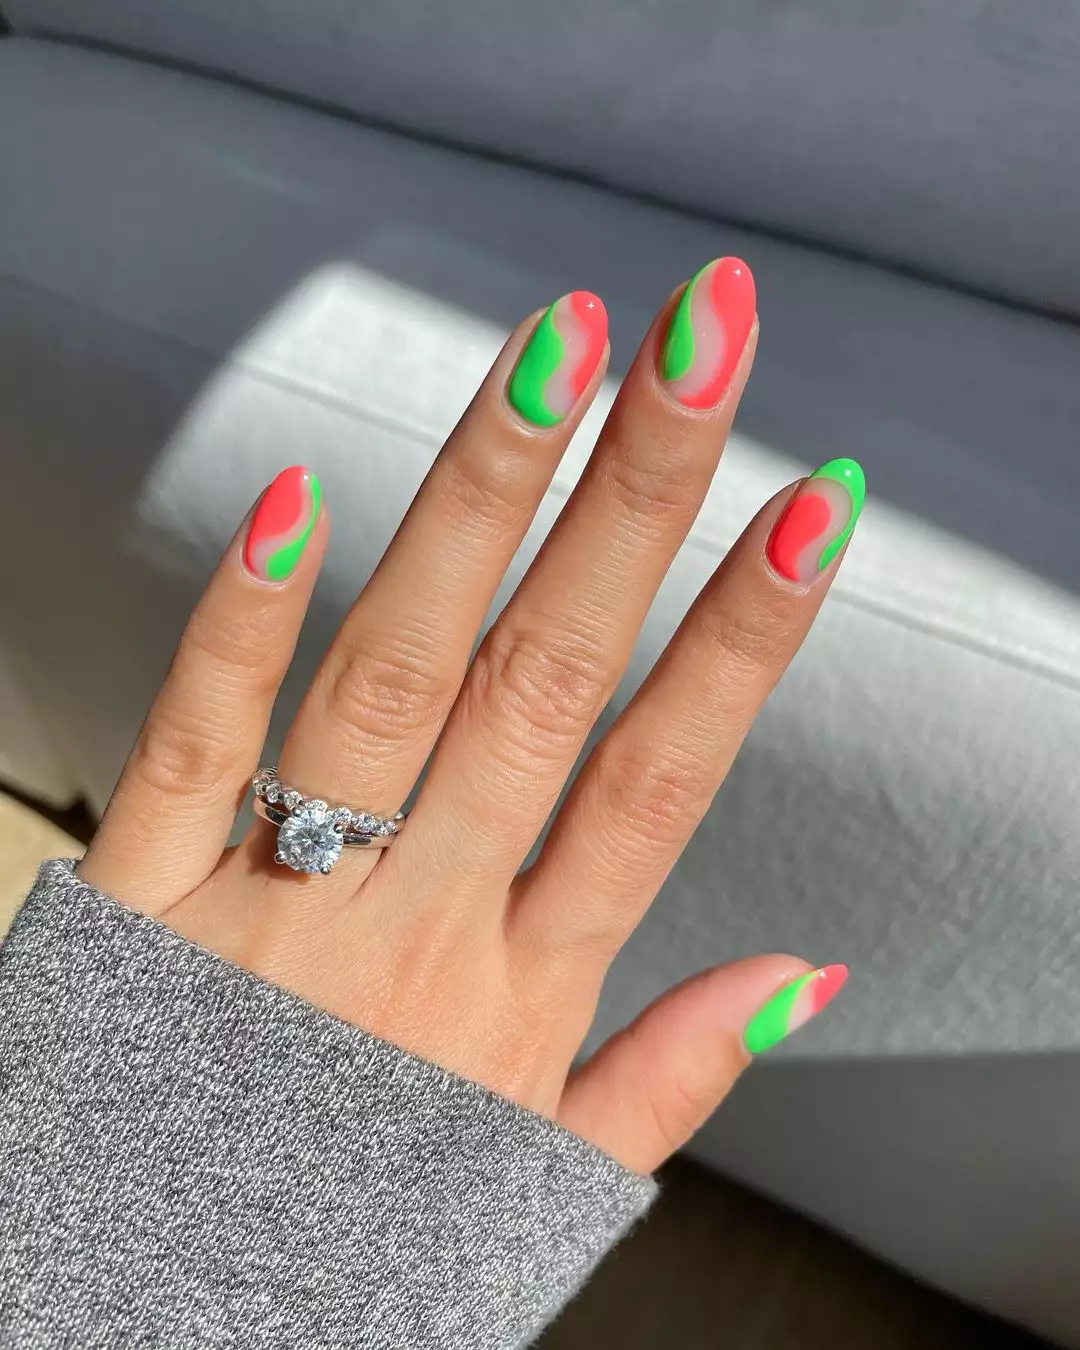 Person's hand with neon pink and green swirl nails.